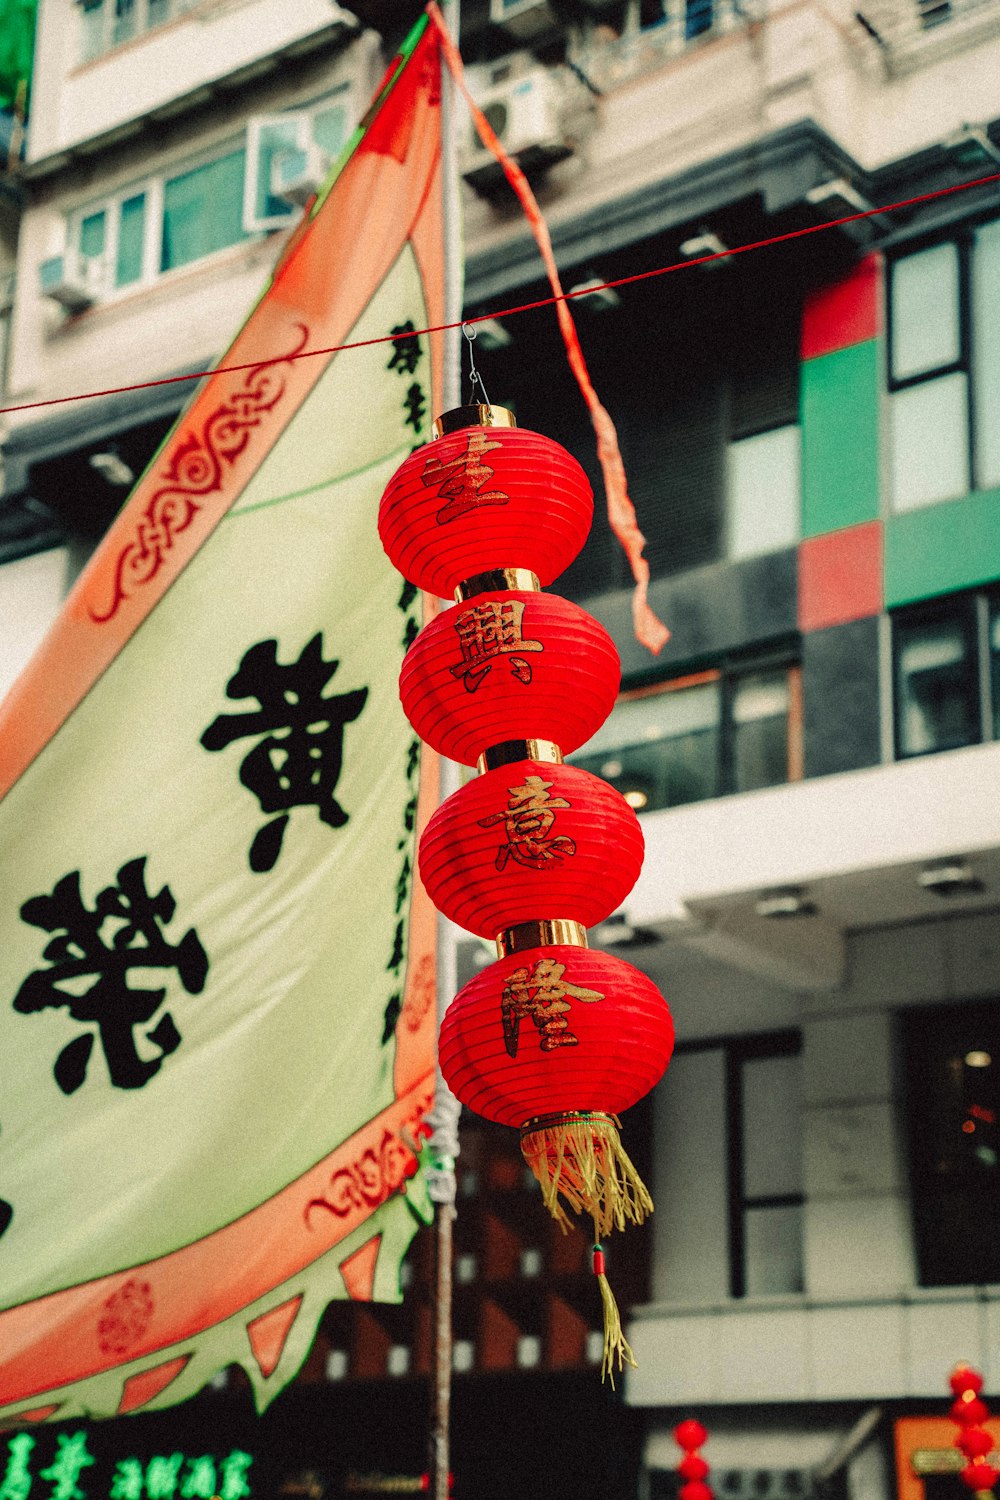 red lanterns hanging from a pole in front of a building